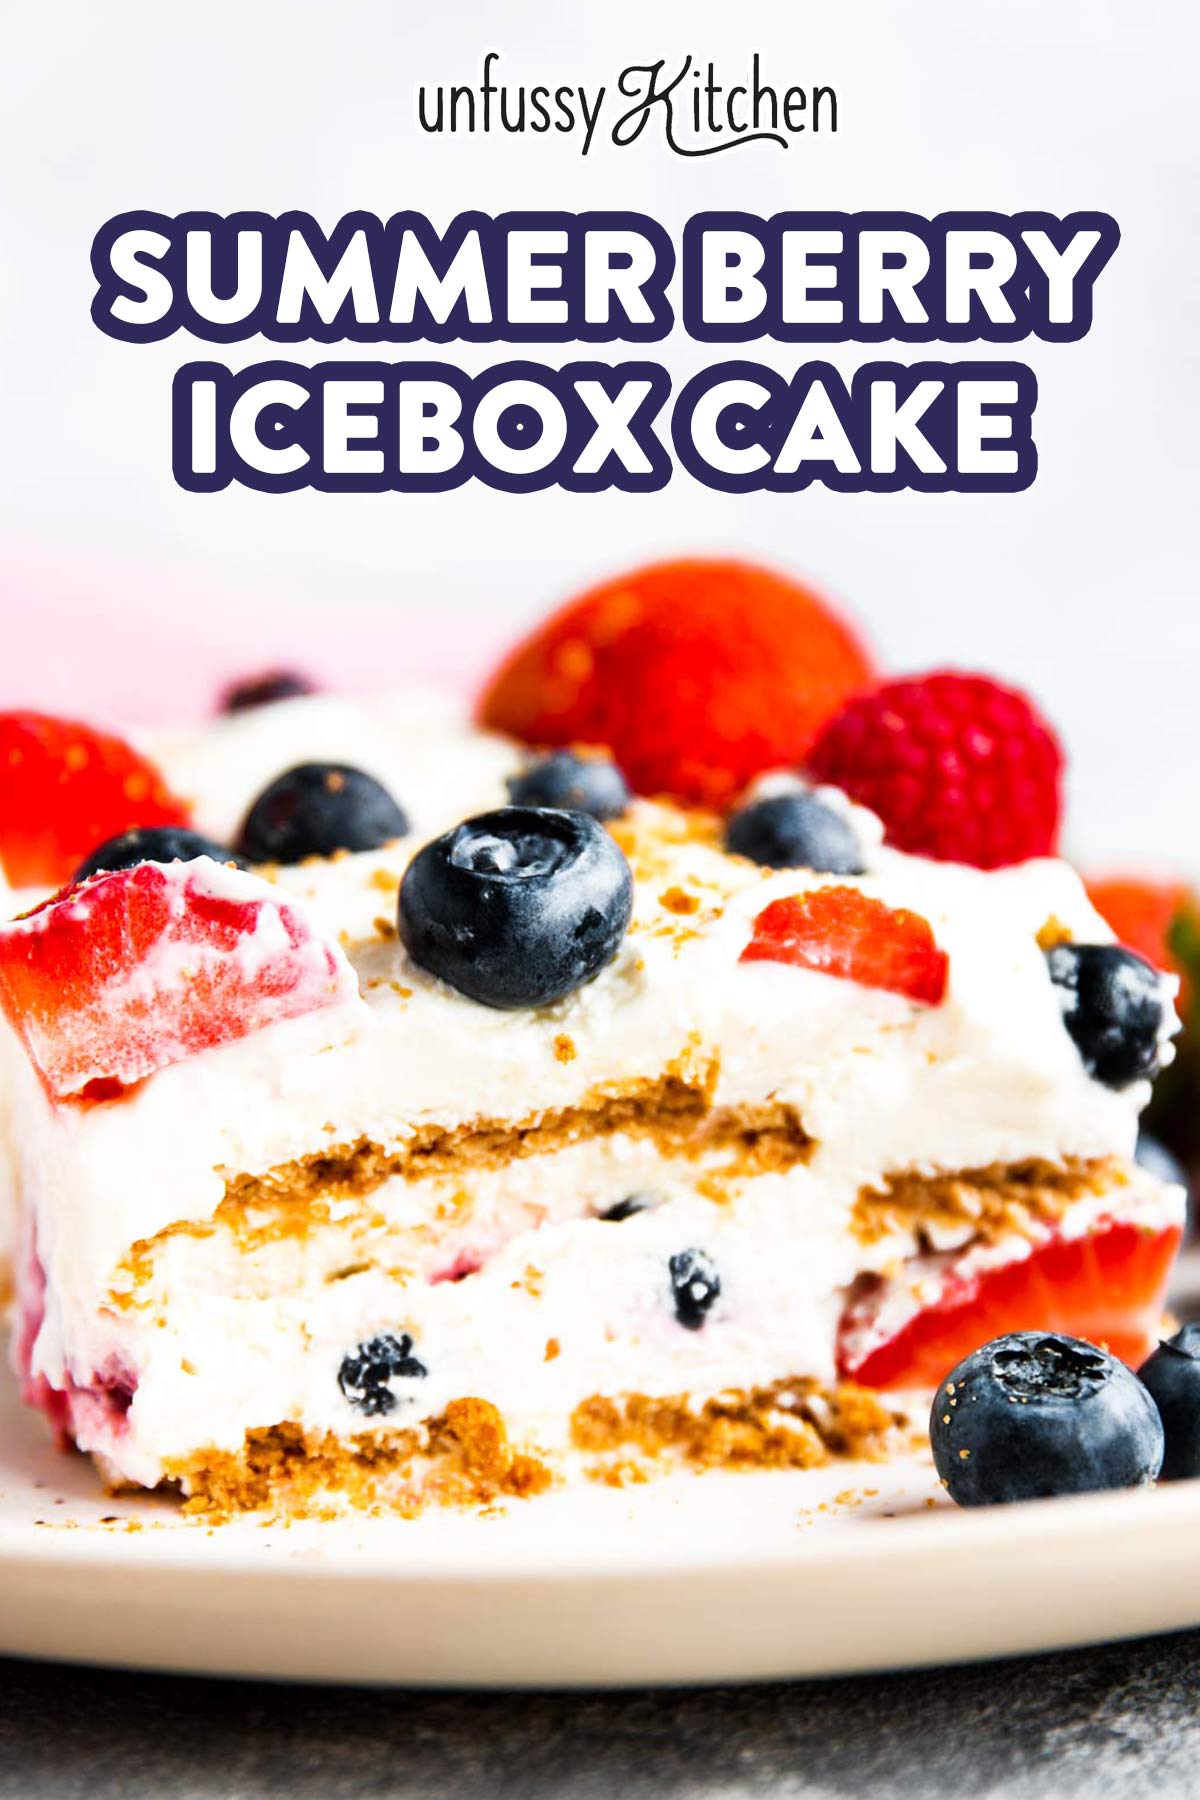 slice of icebox cake on plate with text overlay